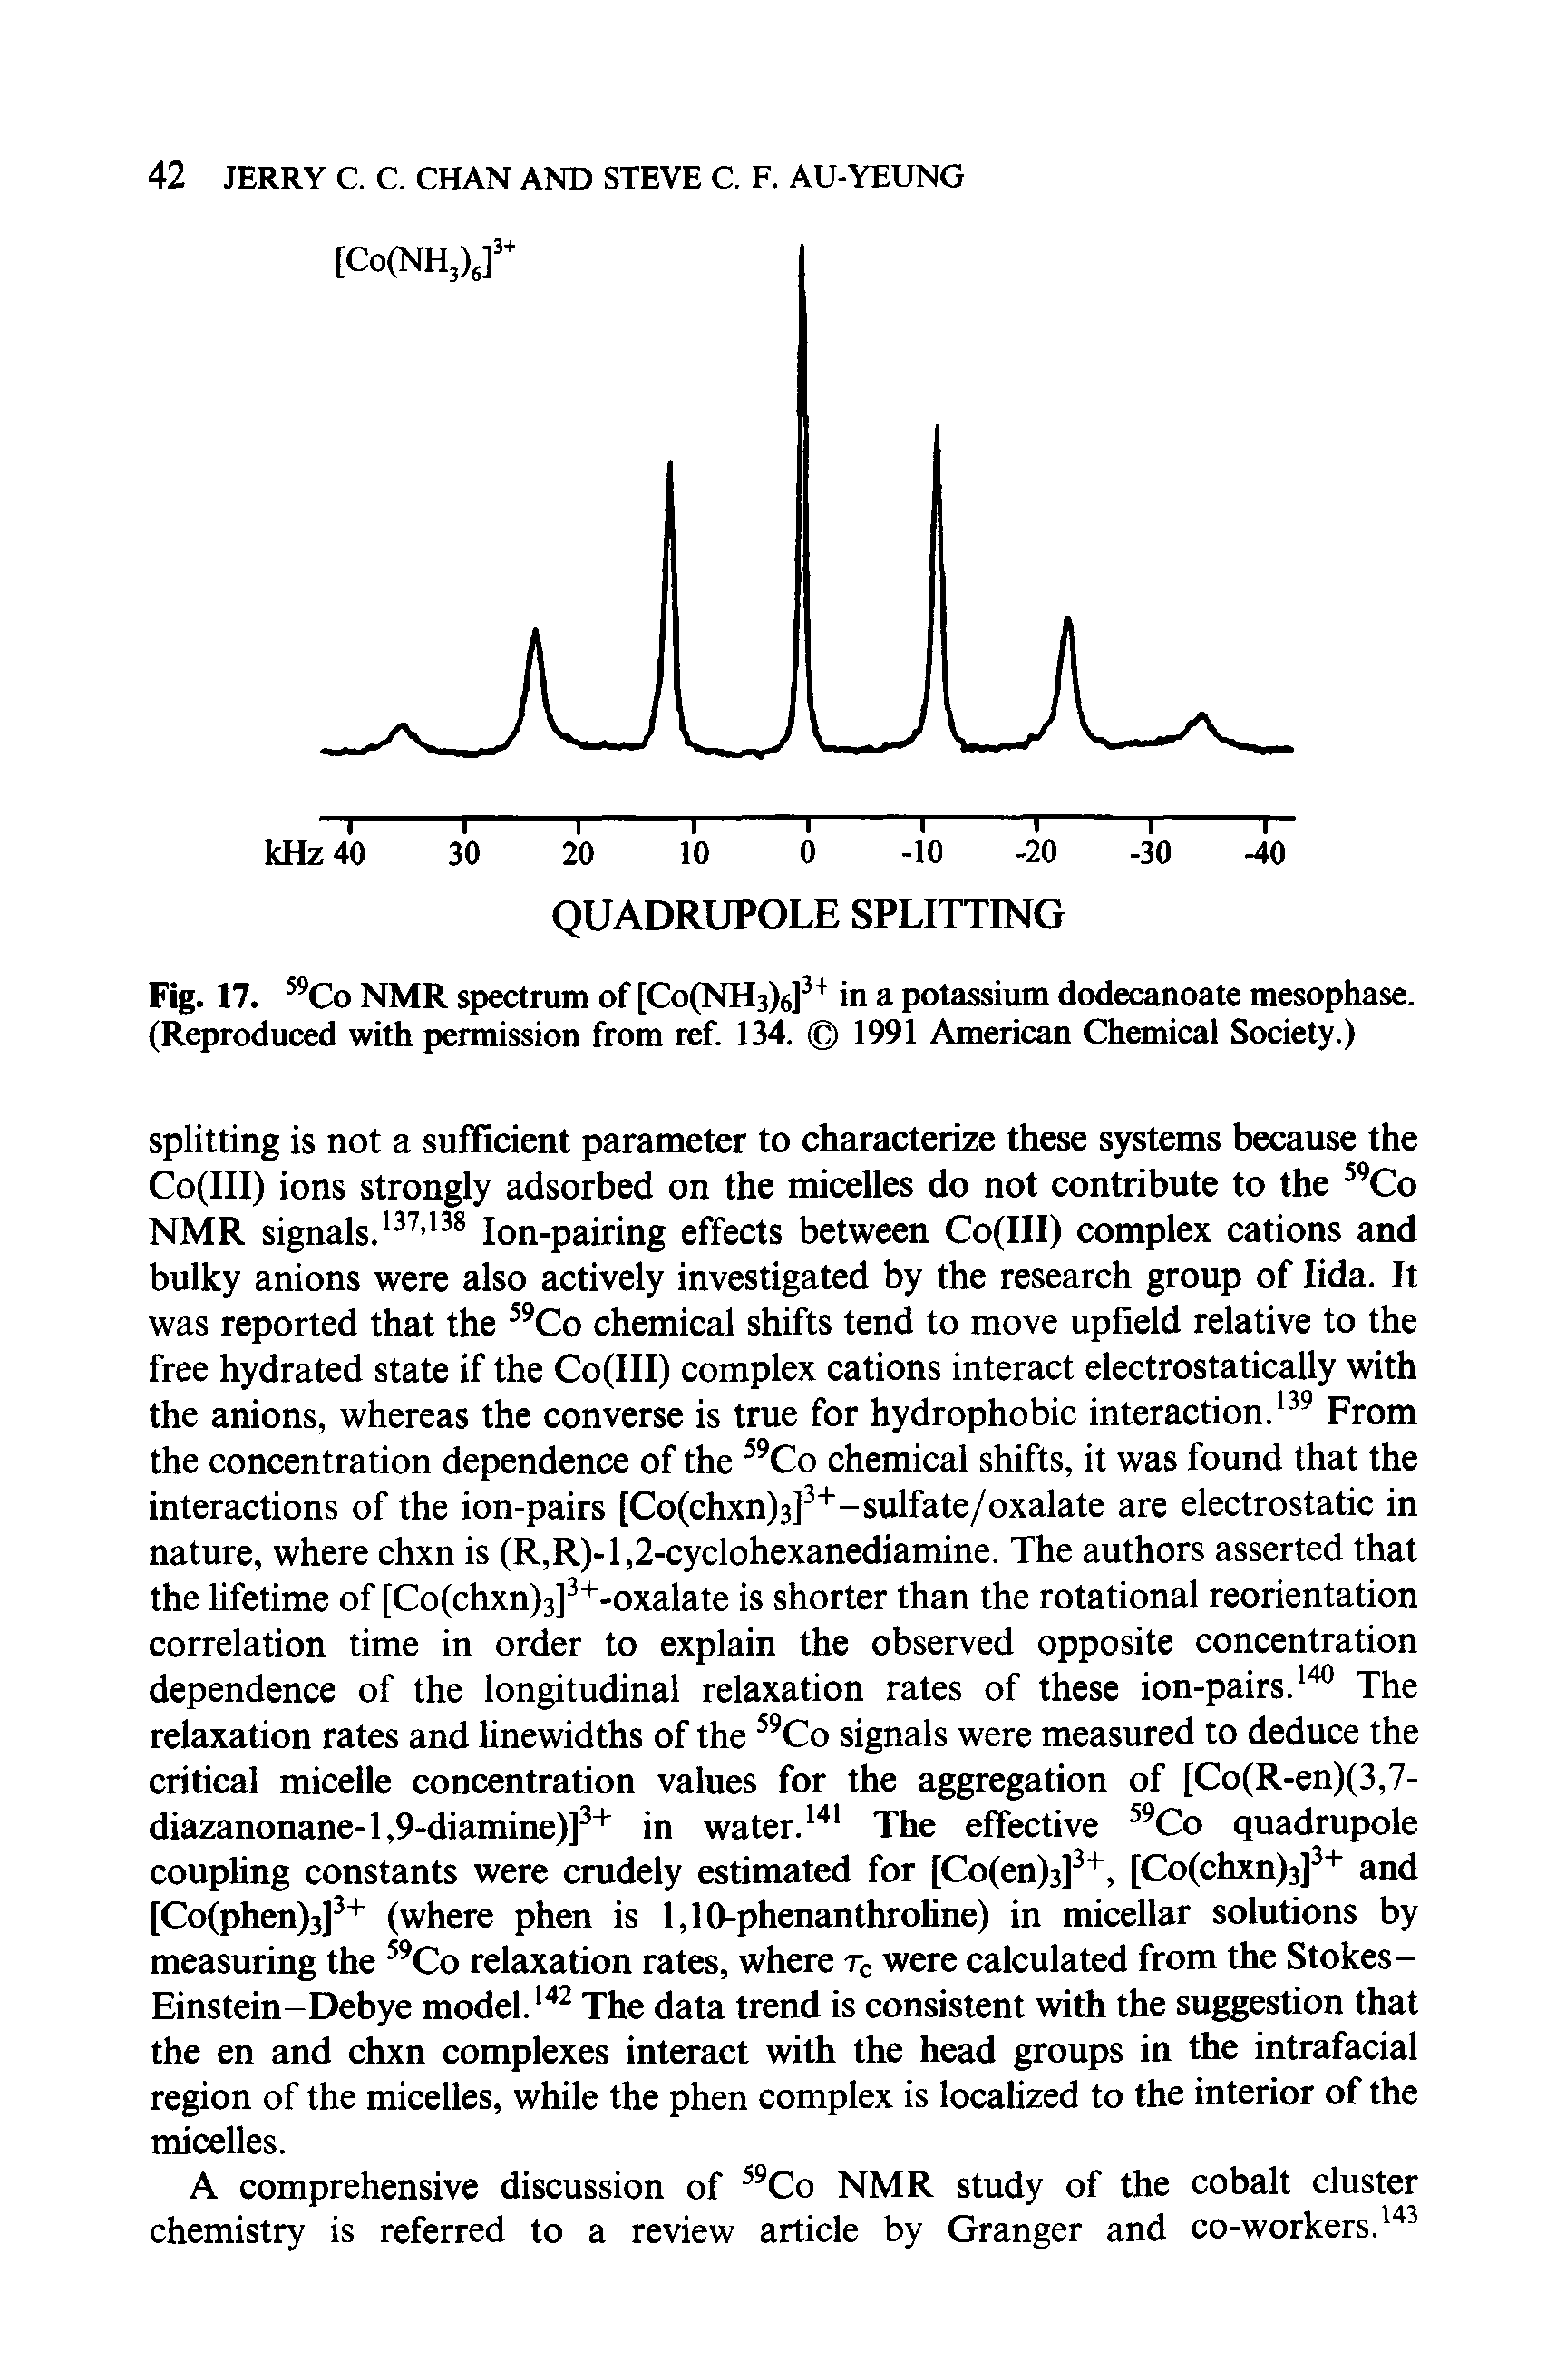 Fig. 17. NMR spectrum of [CoINHs) ] in a potassium dodecanoate mesophase. (Reproduced with permission from ref. 134. 1991 American Chemical Society.)...